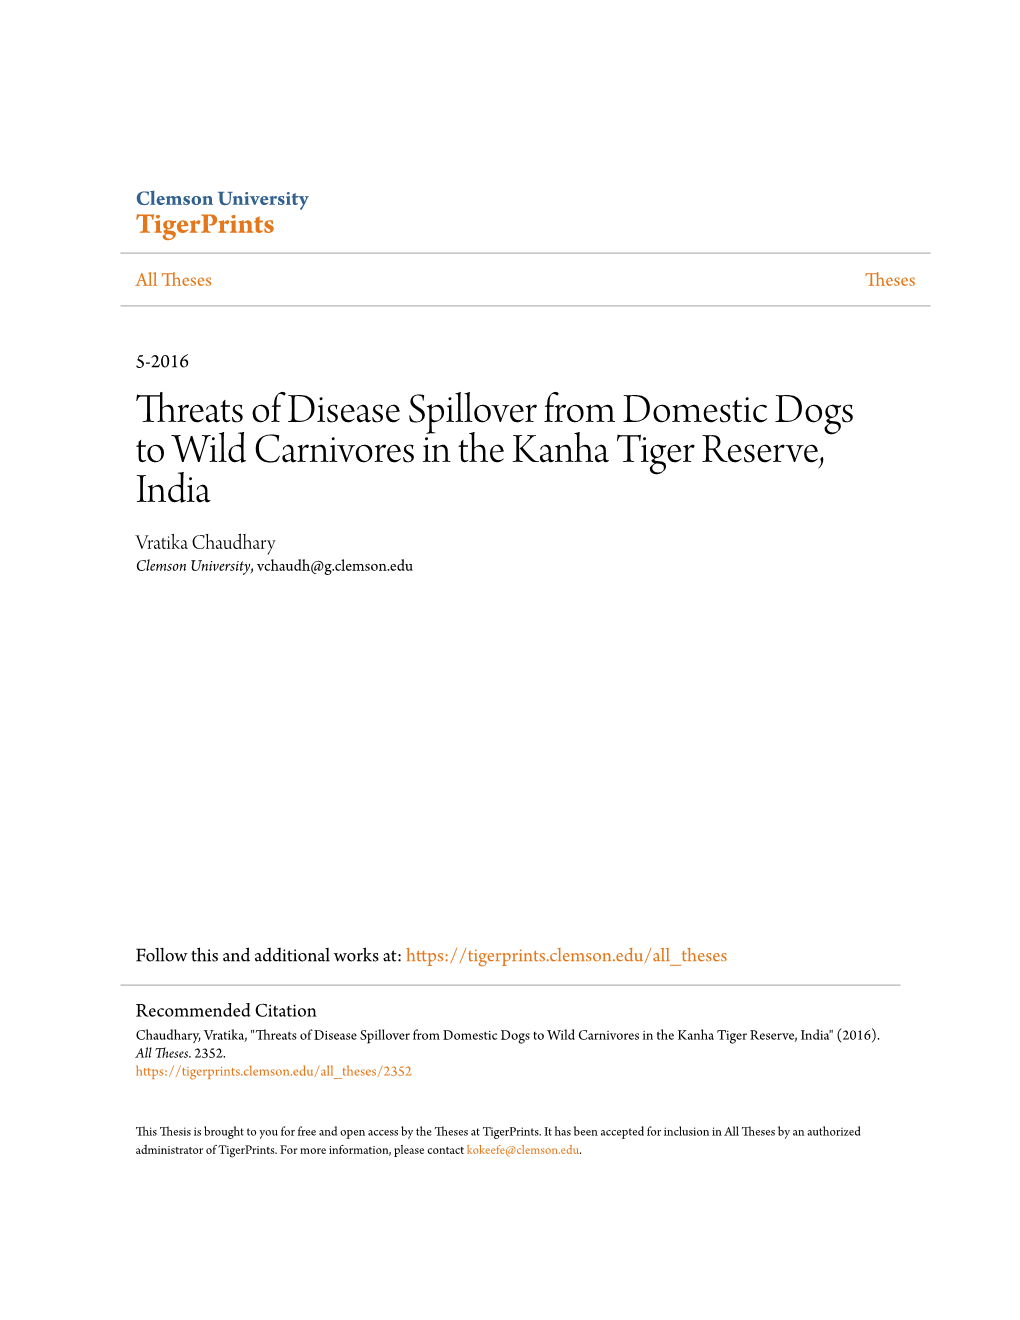 Threats of Disease Spillover from Domestic Dogs to Wild Carnivores in the Kanha Tiger Reserve, India Vratika Chaudhary Clemson University, Vchaudh@G.Clemson.Edu